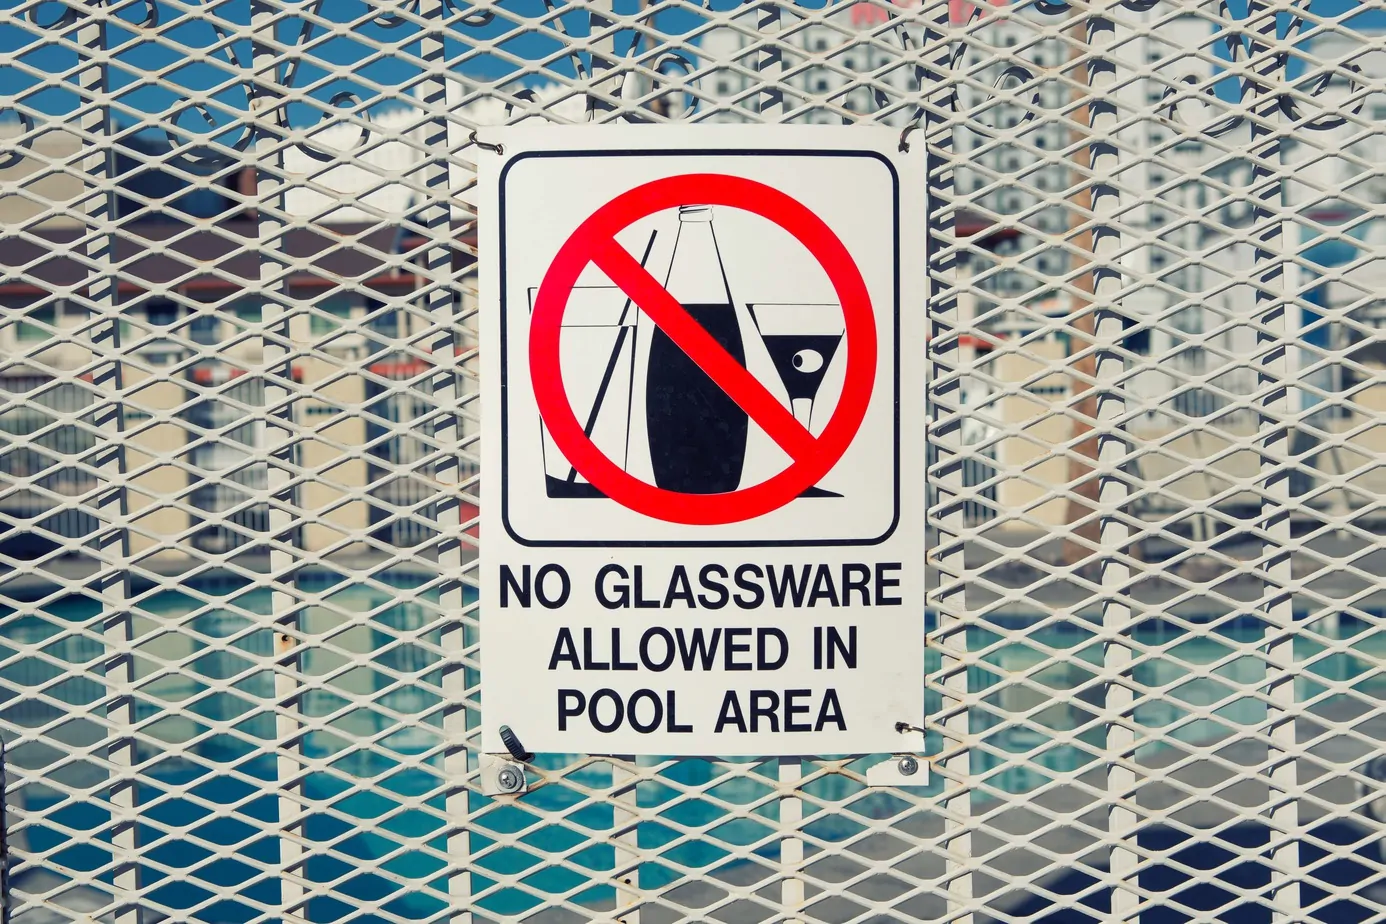 Sign that says No Glassware allowed in the pool area.